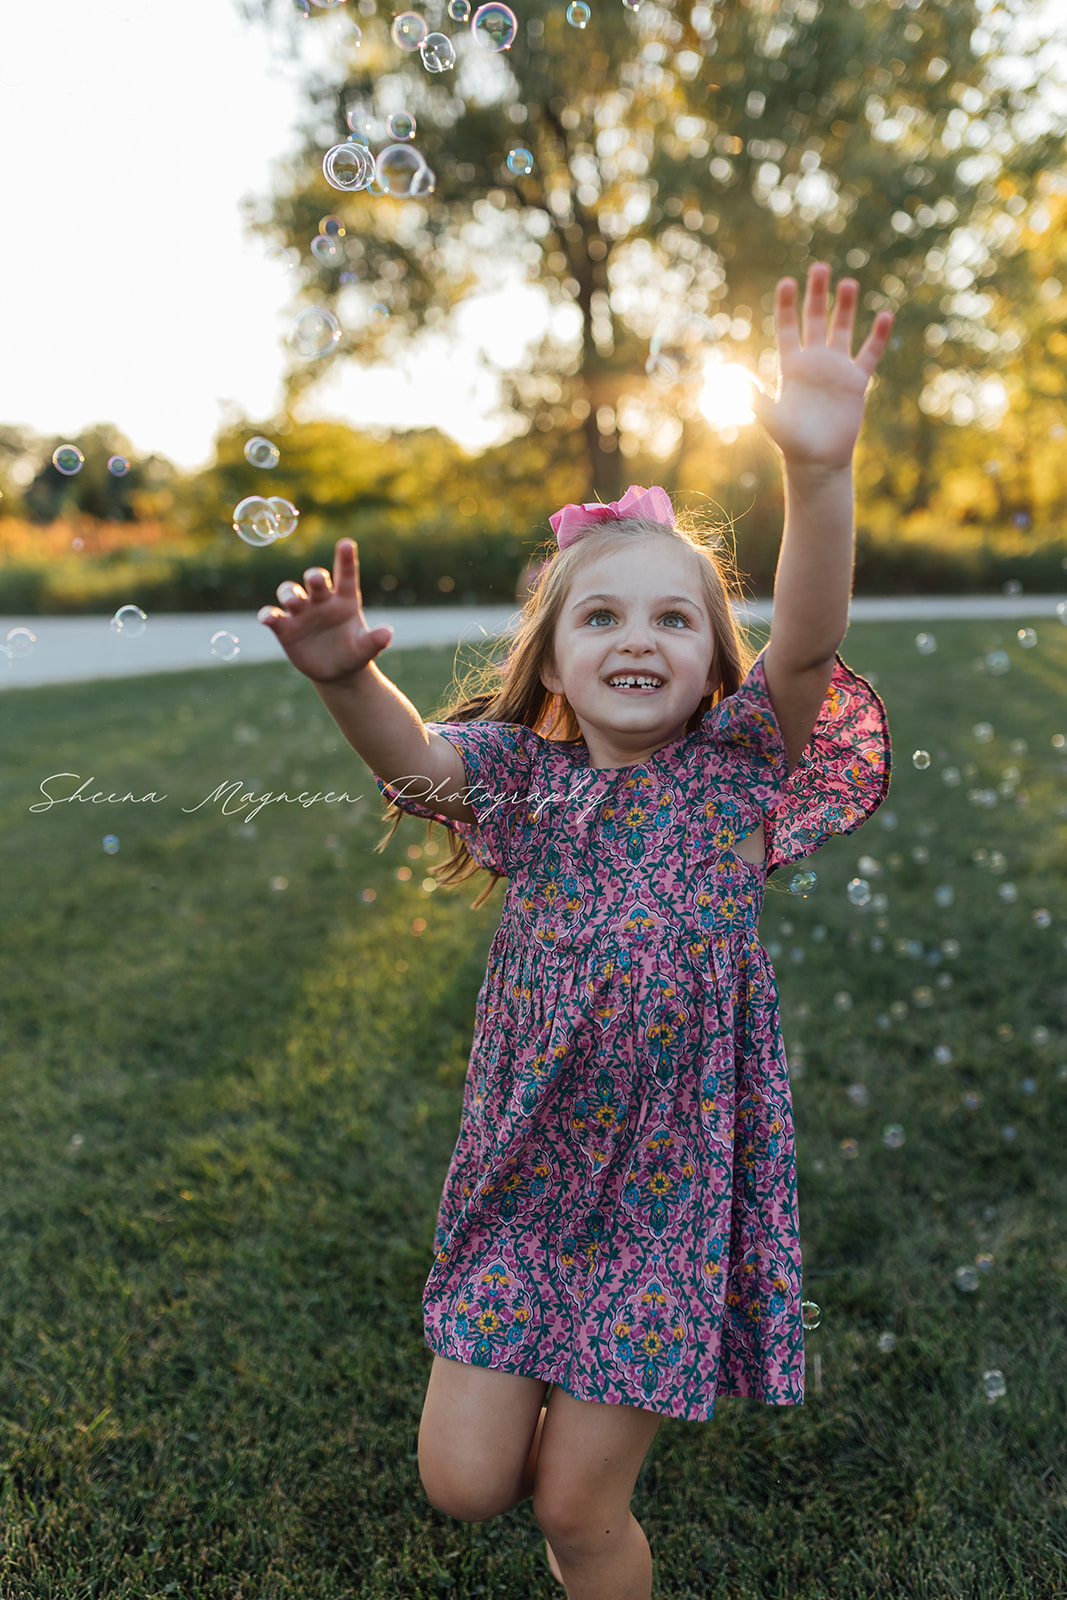 Outdoor family session at sunset in a field of wildflowers in Naperville, IL